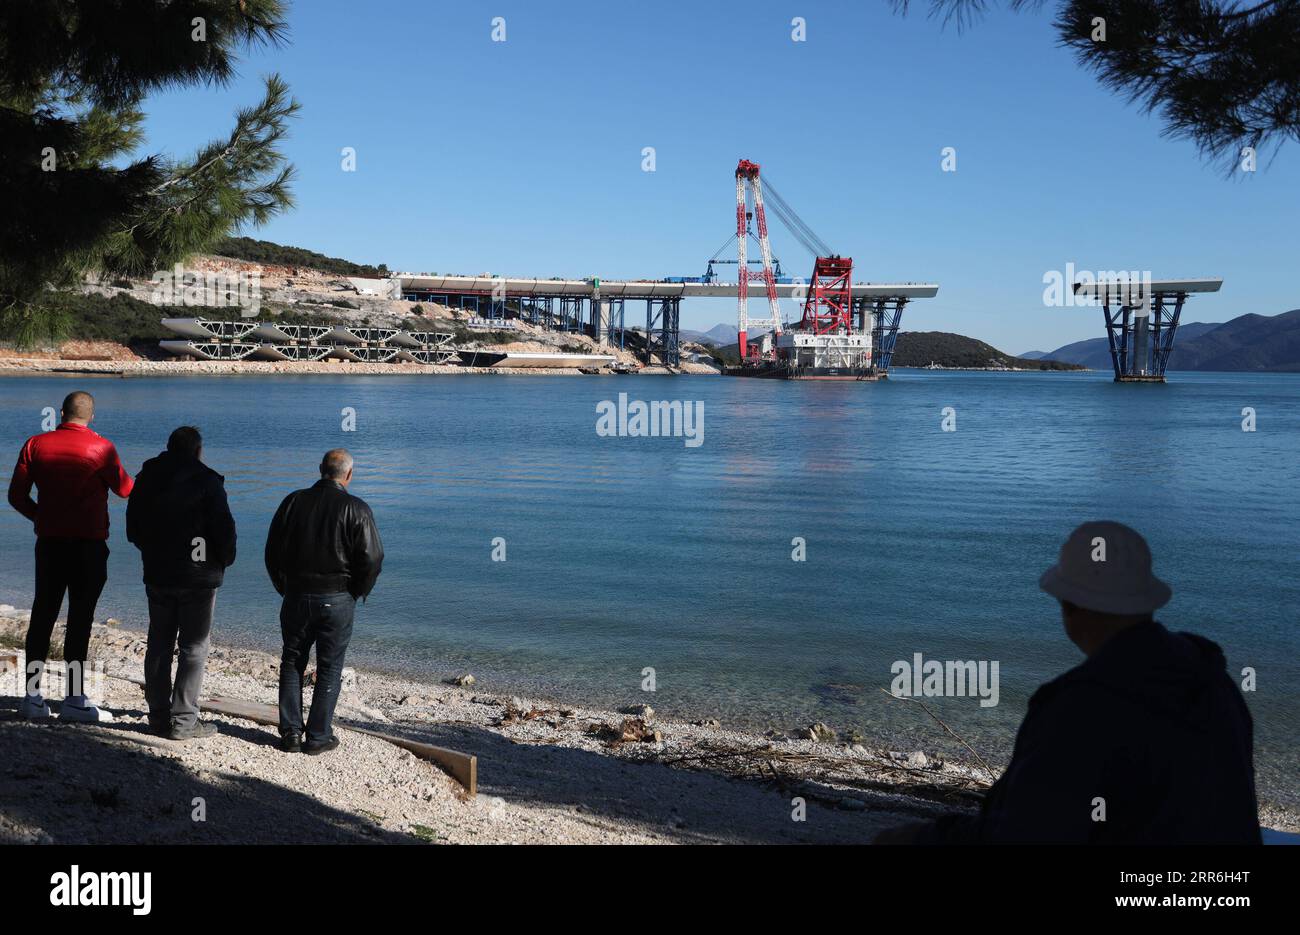 210215 -- KOMARNA CROATIA, Feb. 15, 2021 -- People watch as a crane carries a steel box girder to connect the Croatian mainland with the first sea-based pillar of the Peljesac Bridge near Komarna, Croatia, Feb. 15, 2021. The construction of the Peljesac Bridge, the biggest infrastructure project in Croatia, will be completed in June 2022, Prime Minister Andrej Plenkovic announced on Monday after visiting the site. The 2.4-kilometer-long Peljesac Bridge connects Croatia s southernmost Dubrovnik-Neretva County to the rest of the mainland, giving the southeastern European country a continuous lan Stock Photo